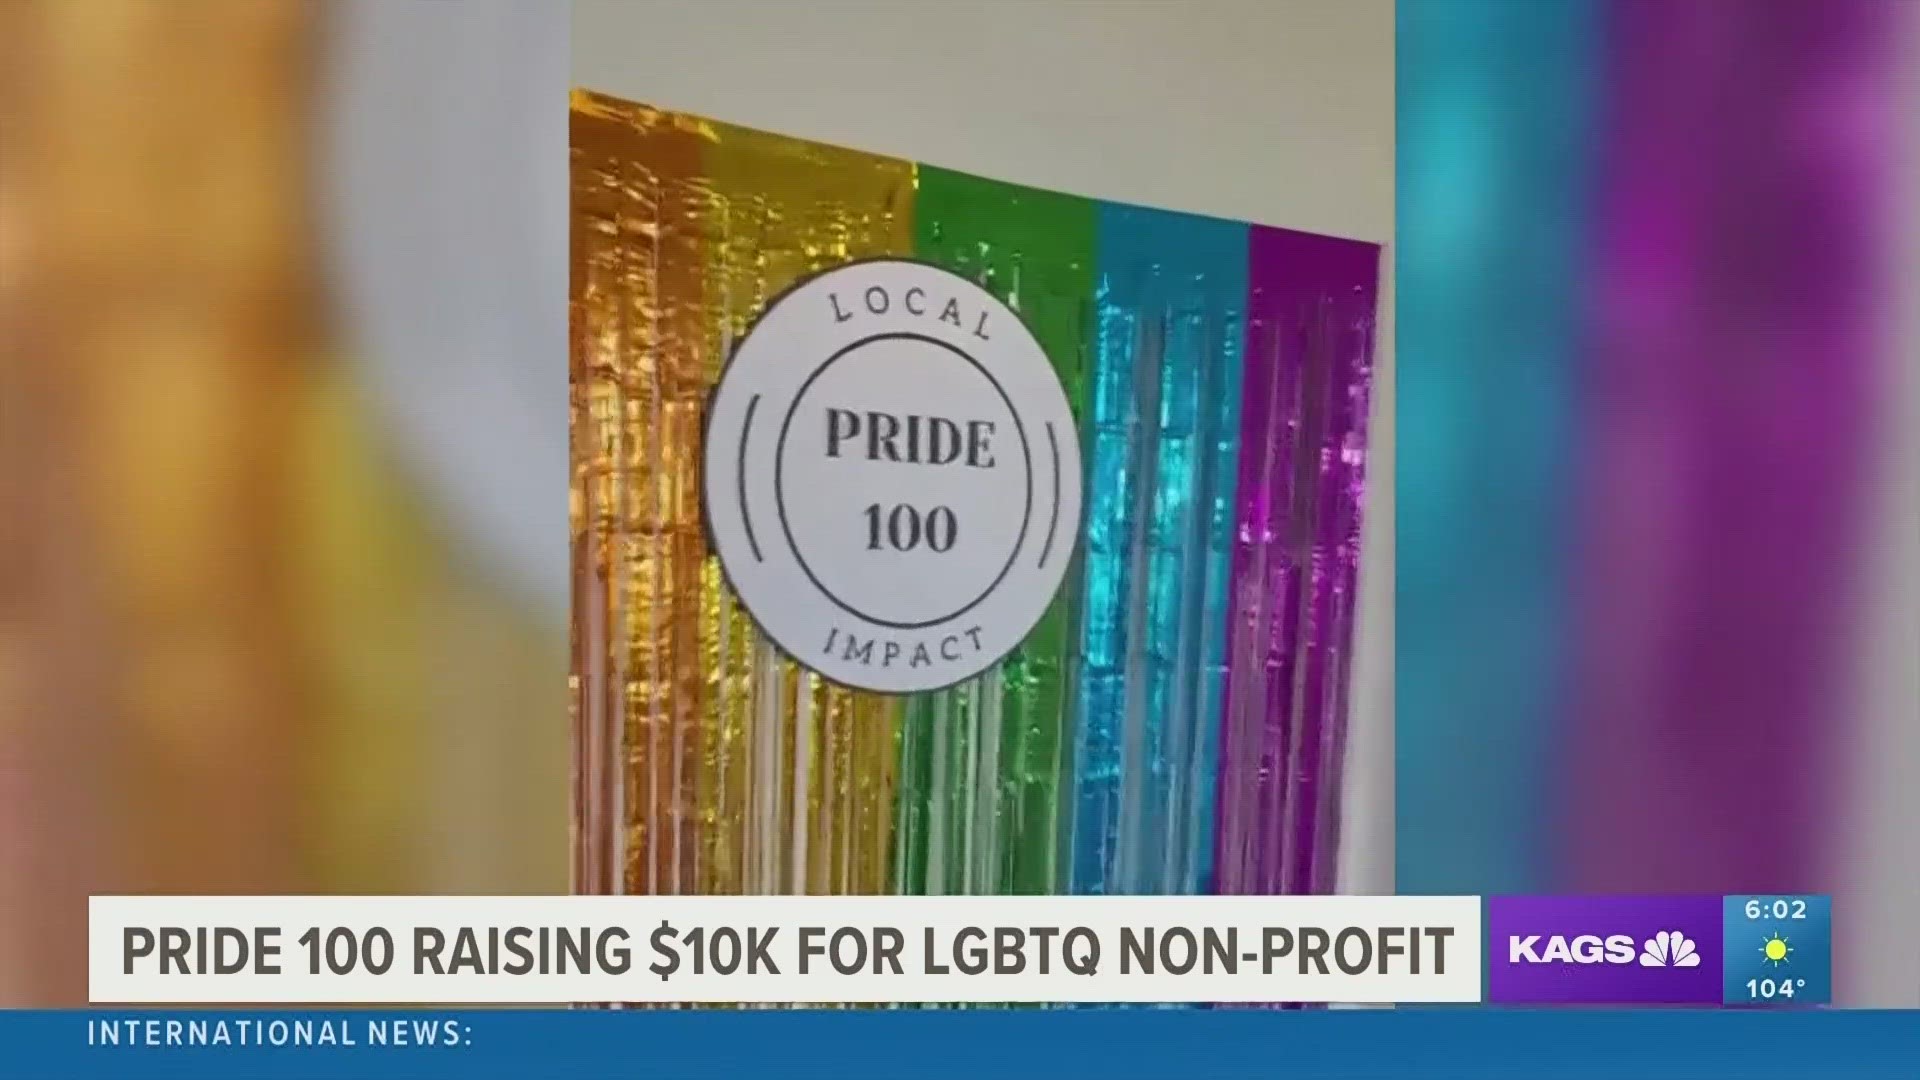 Pride 100 is composed of members willing to donate money to a local LGBTQIA+ resource that has created a positive impact in the community.